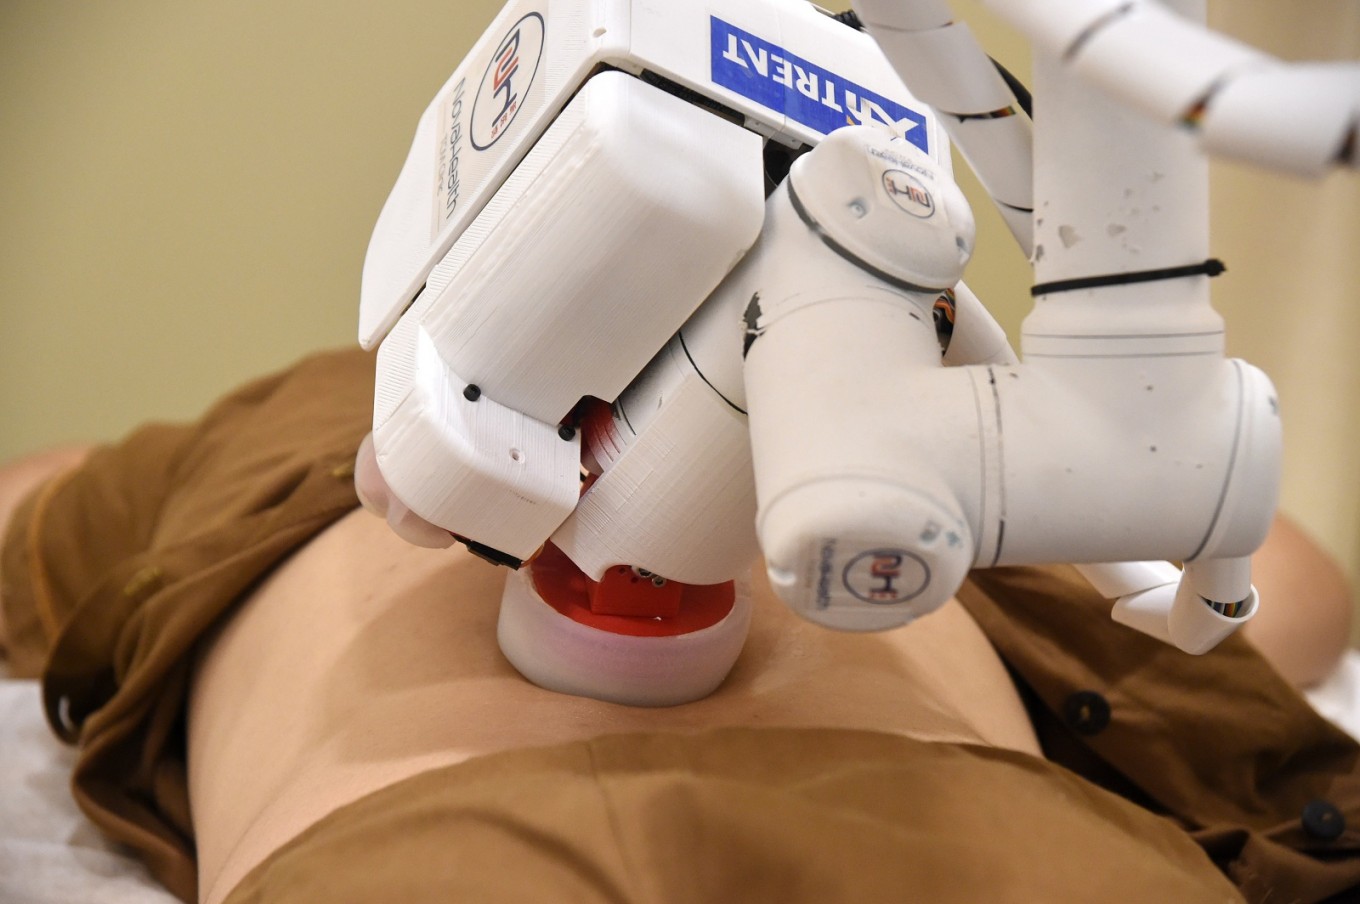 Emma robot masseuse gets work in Singapore - Science & Tech - The Post